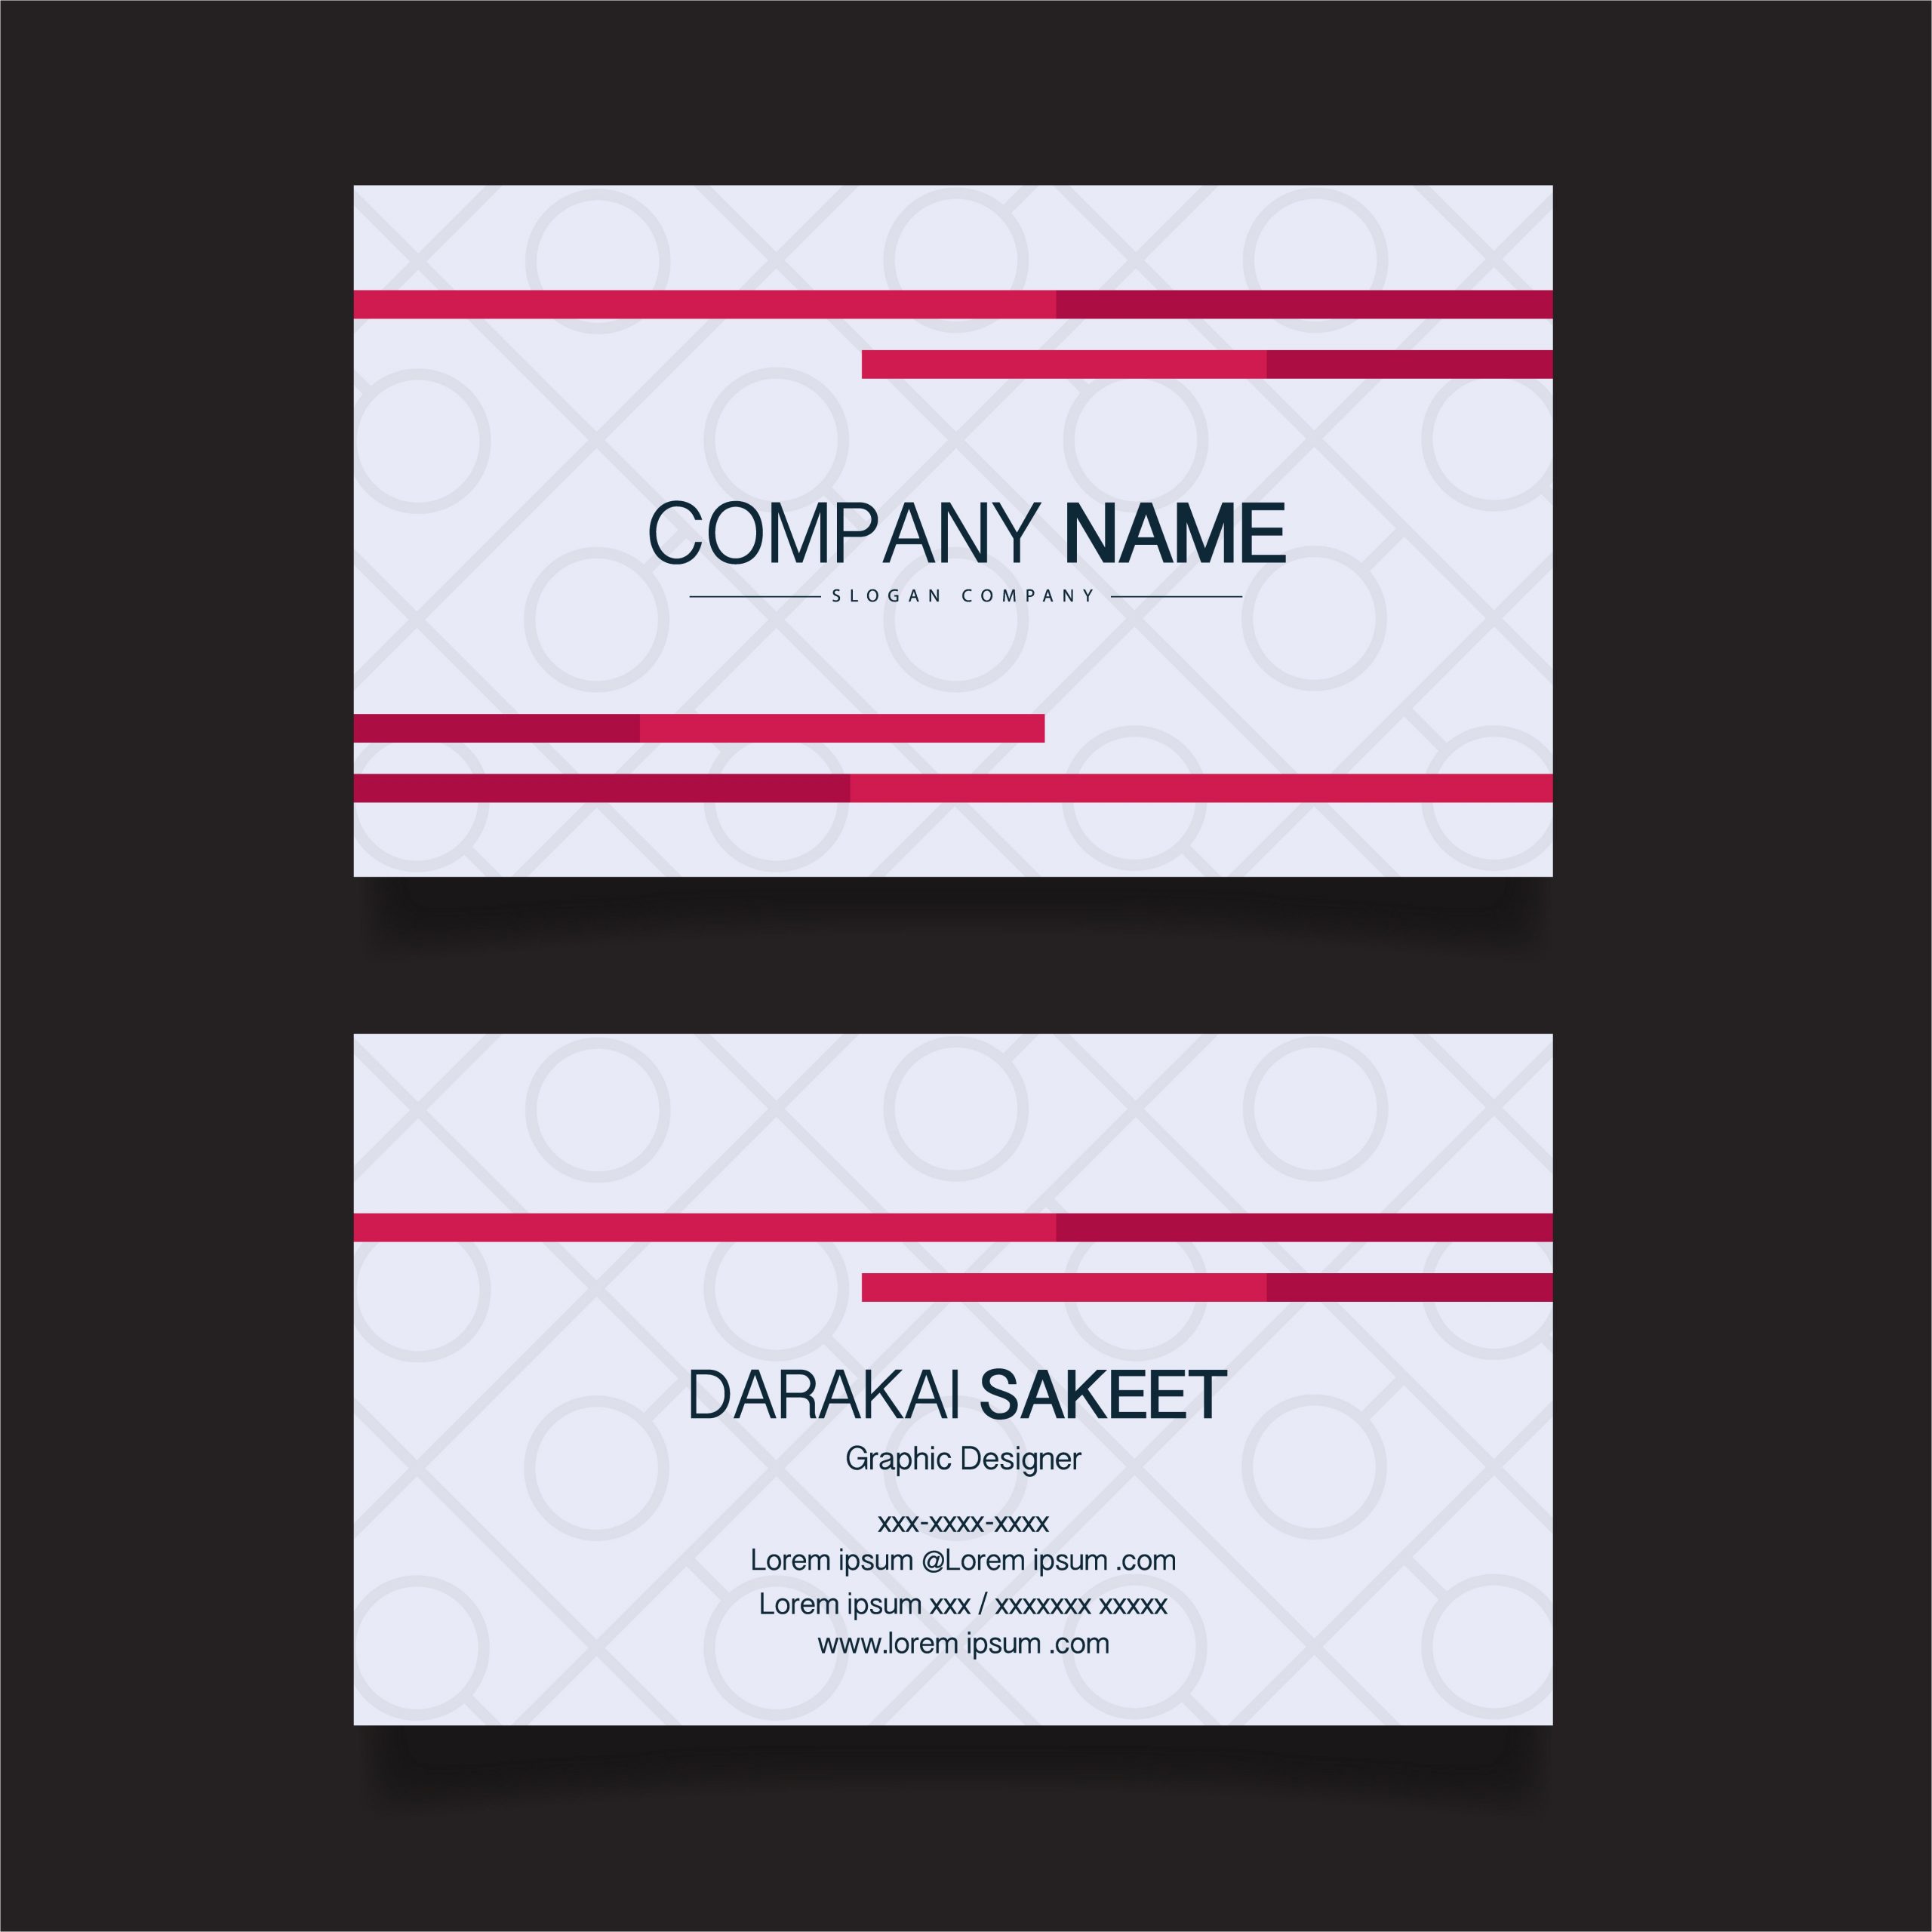 name card modern simple business card template vector illustration